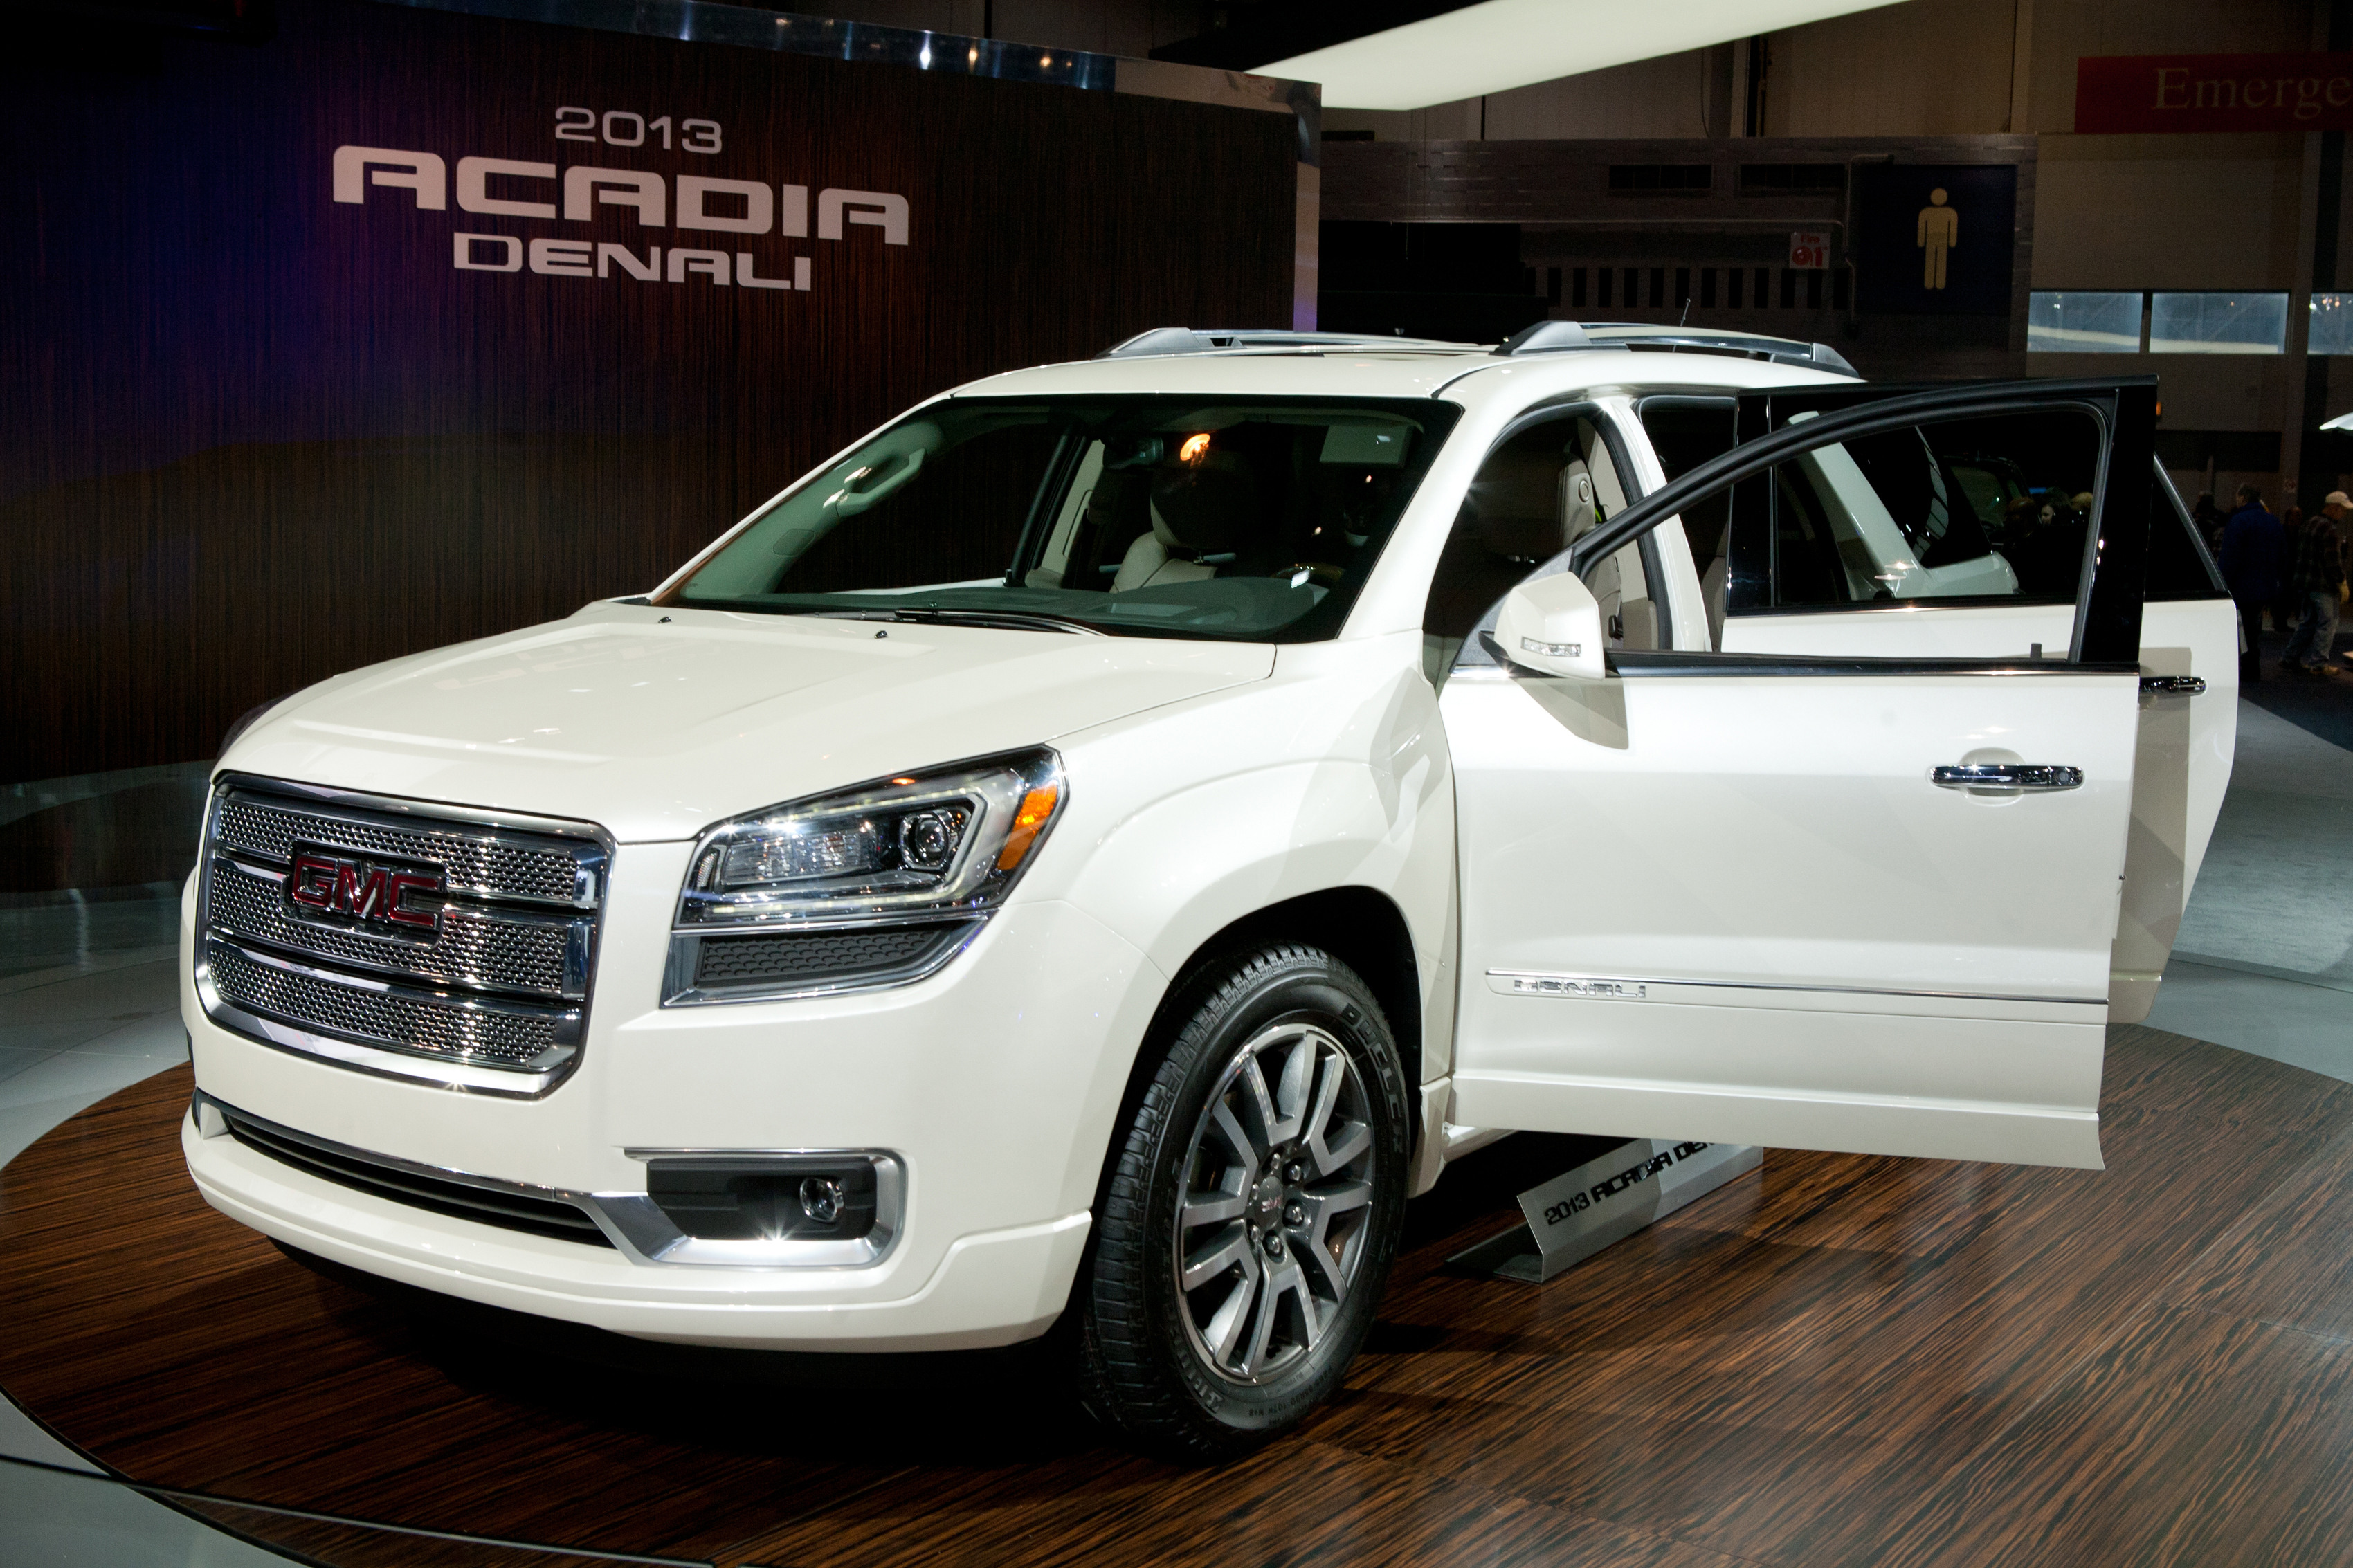 CHICAGO - FEB 12: THE 2013 GMC ACADIA DENALI ON DISPLAY AT THE 2012 CHICAGO AUTO SHOW. FEBRUARY 12, 2012 IN CHICAGO, ILLINOIS. BY YARO